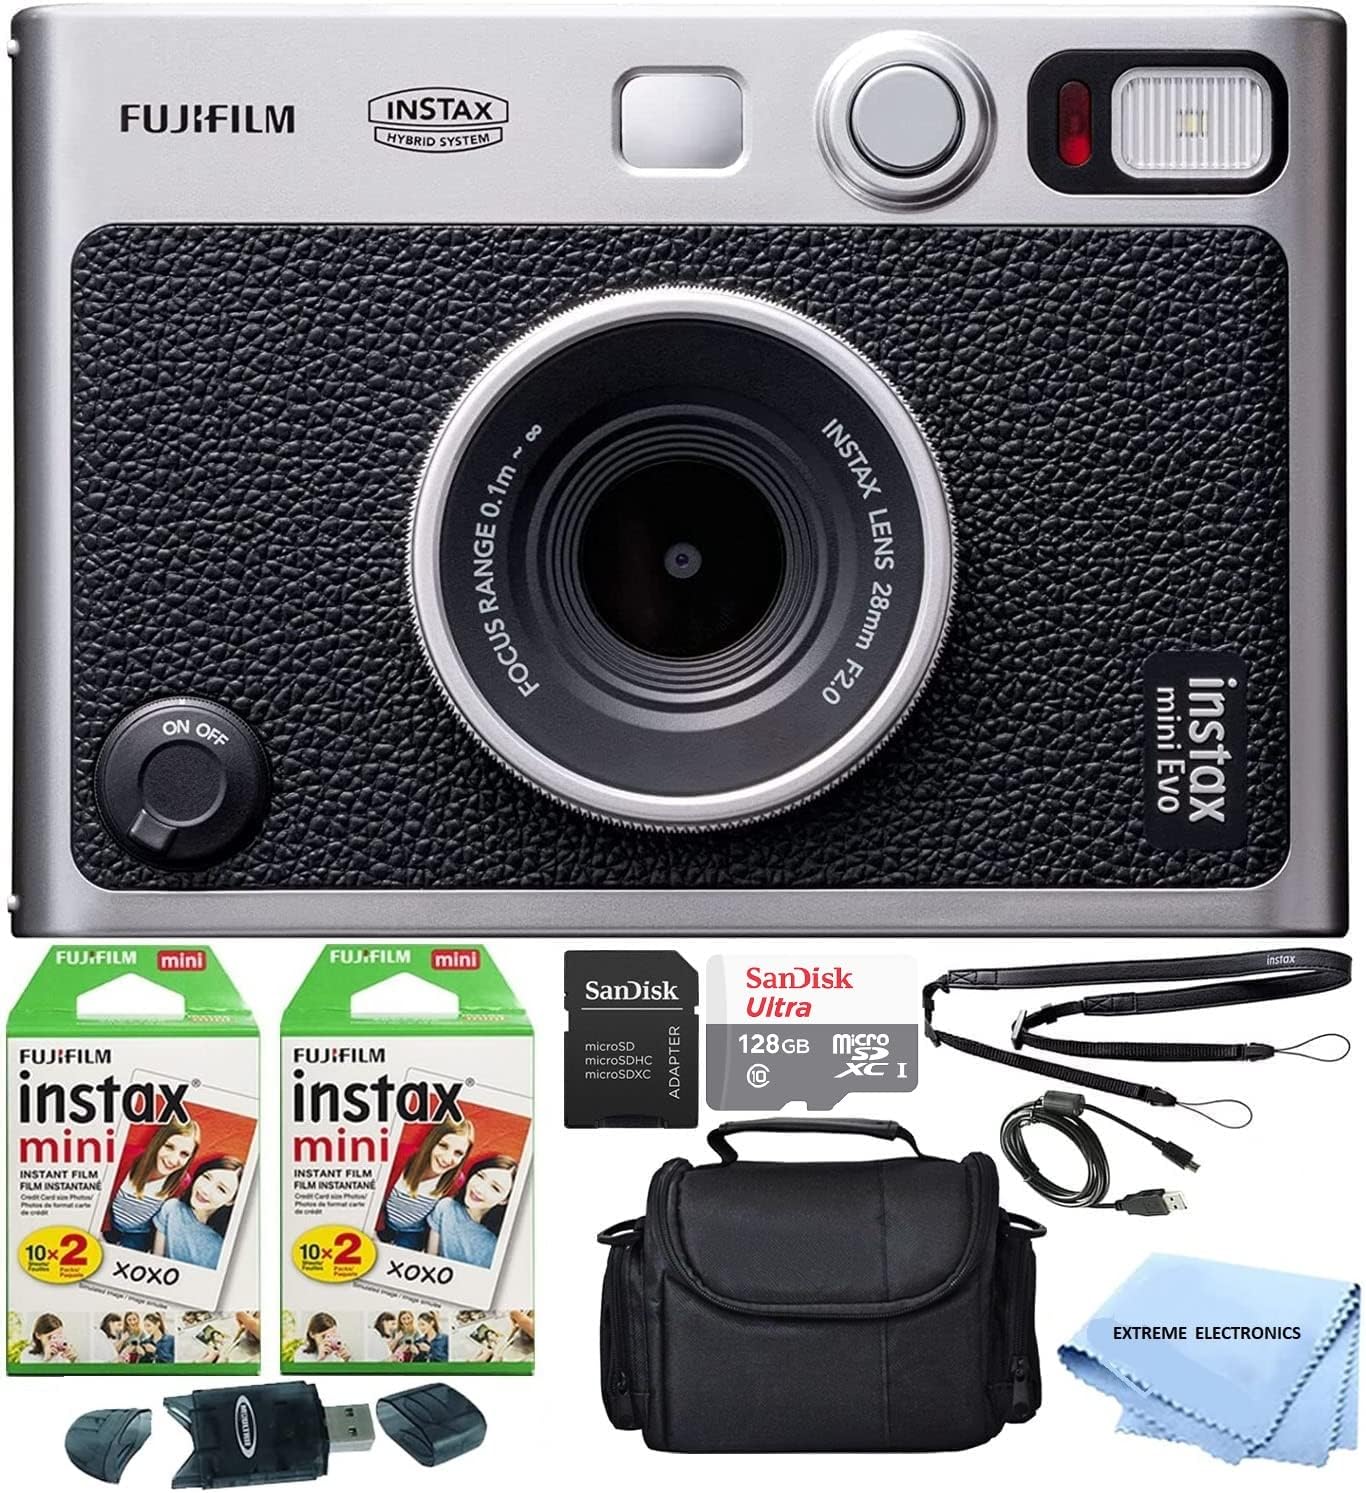 Fujifilm Instax Mini EVO Hybrid Instant Film Camera Bundle with 40 Instant Film Sheets + 128GB microSD Memory Card + Small Padded Case + SD Card Reader + Extreme Electronics Cloth